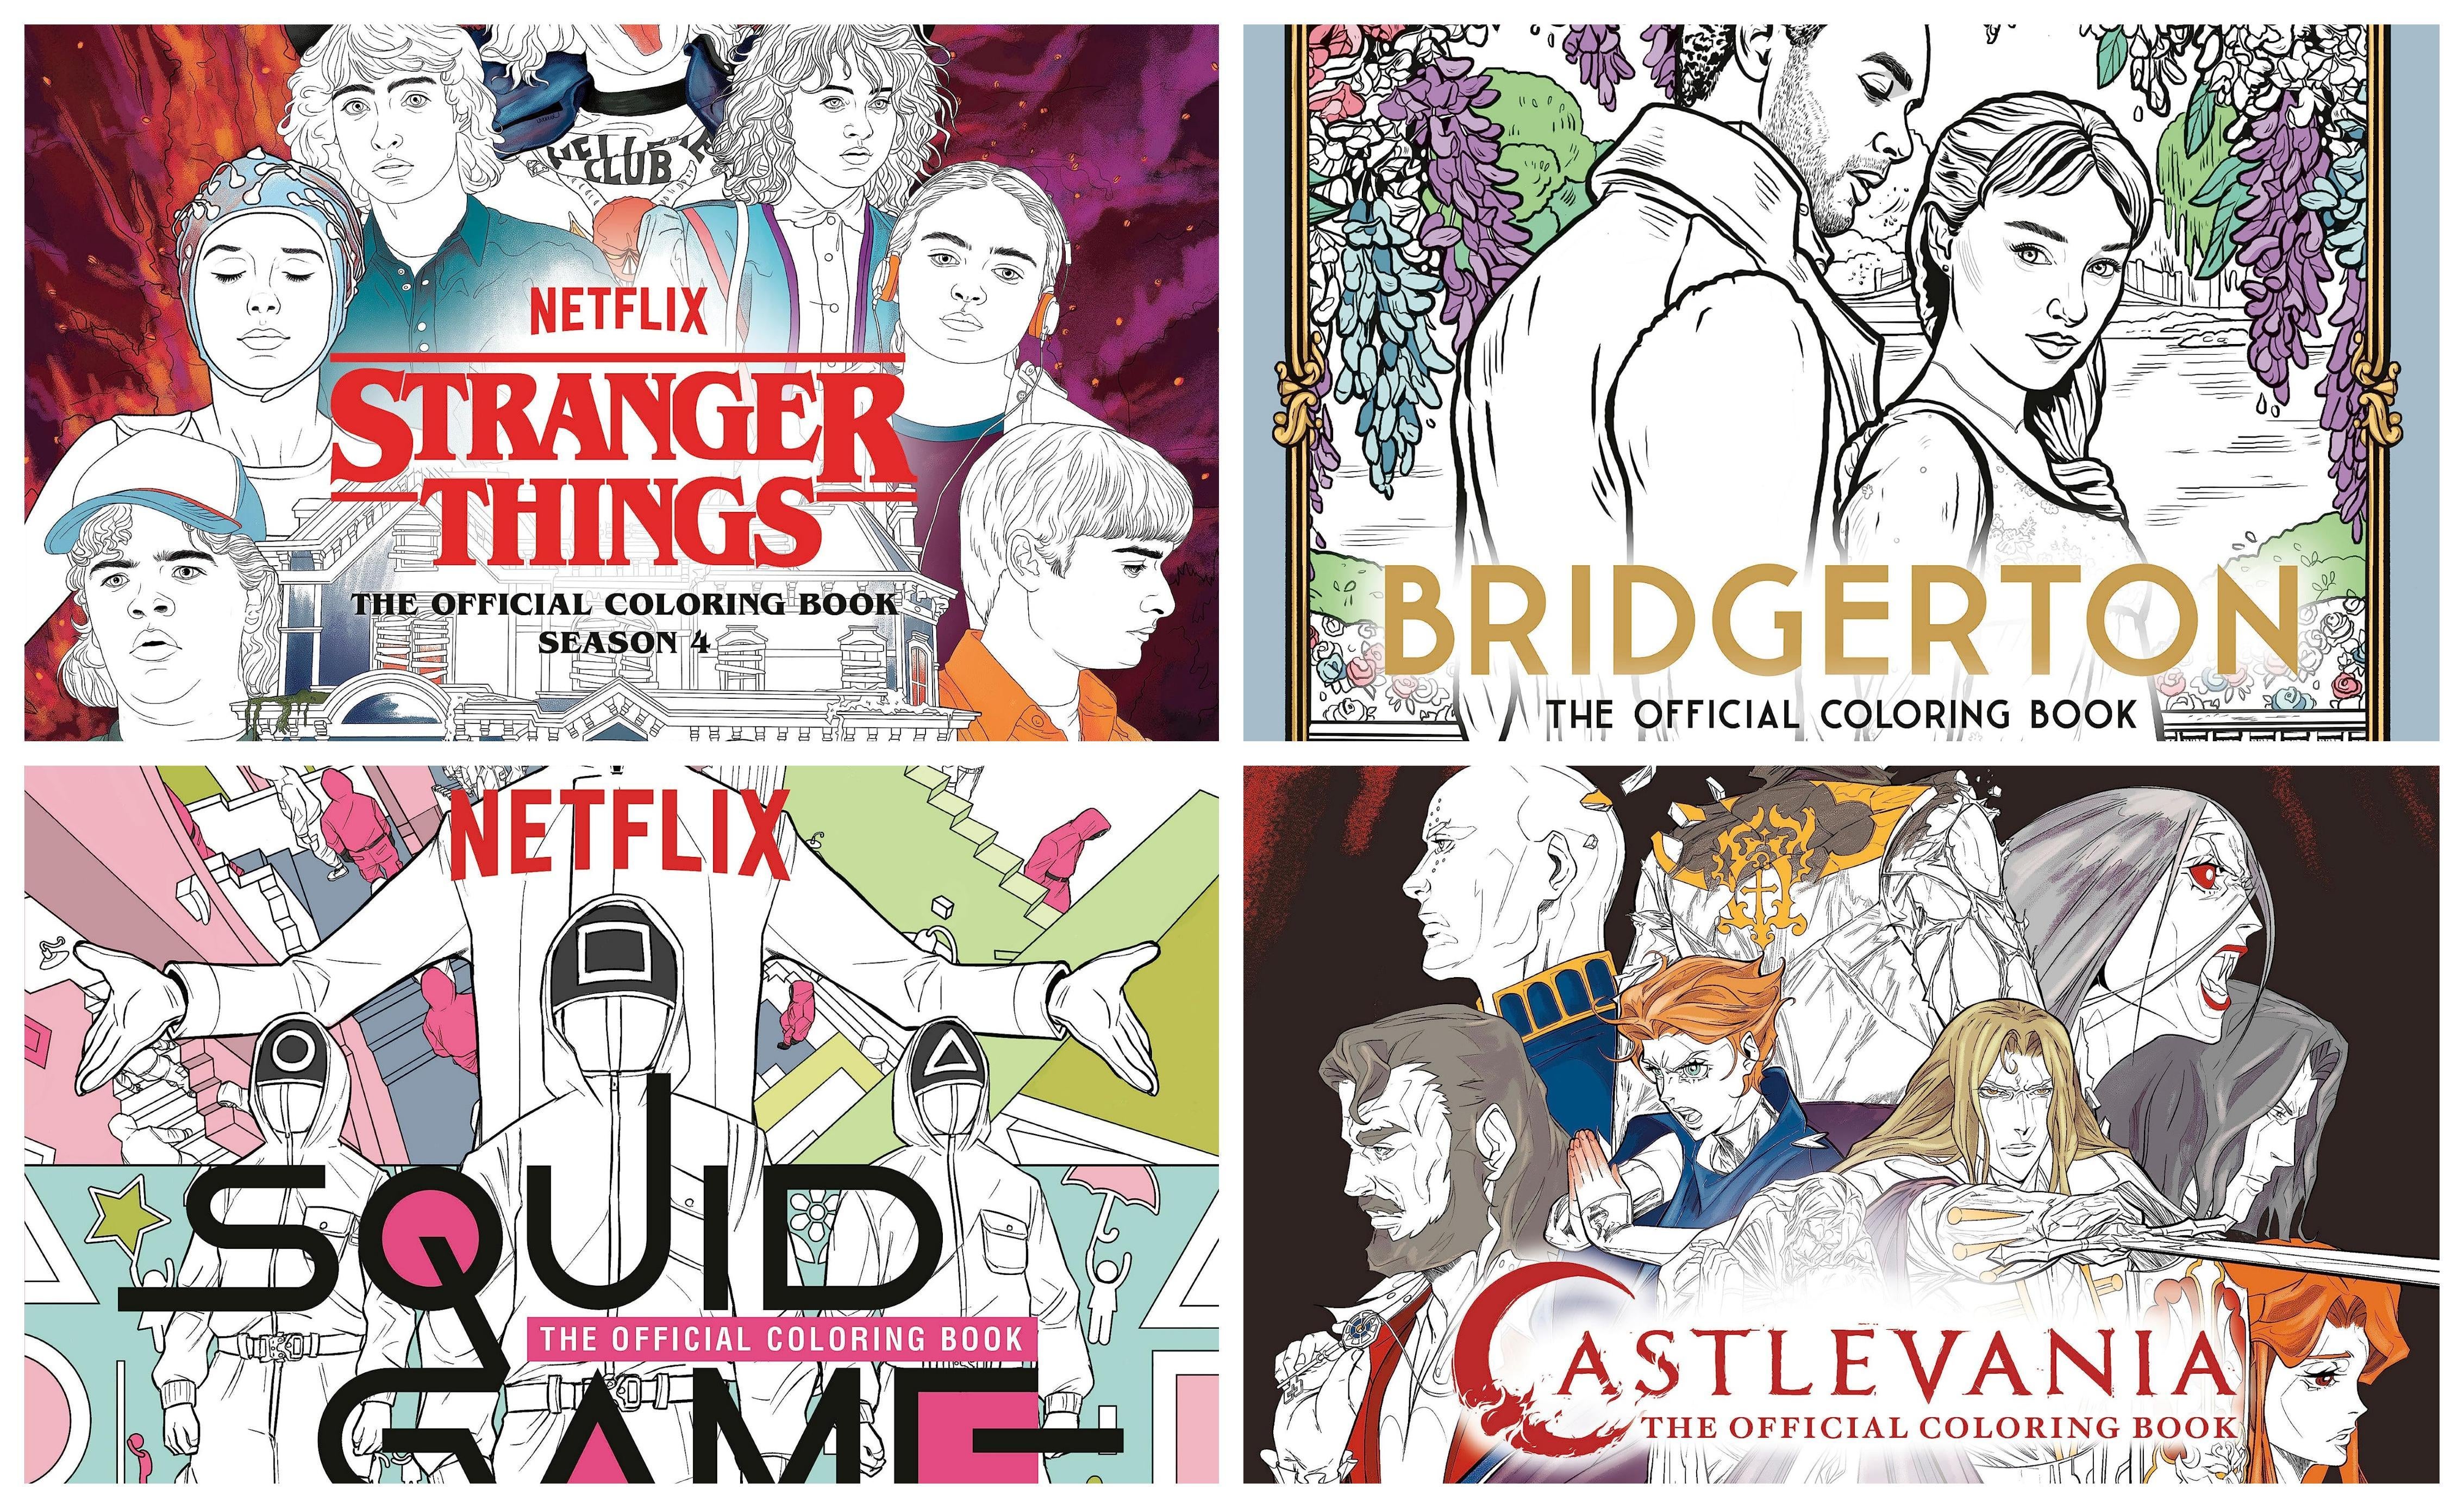 Netflix launches coloring books based on fan